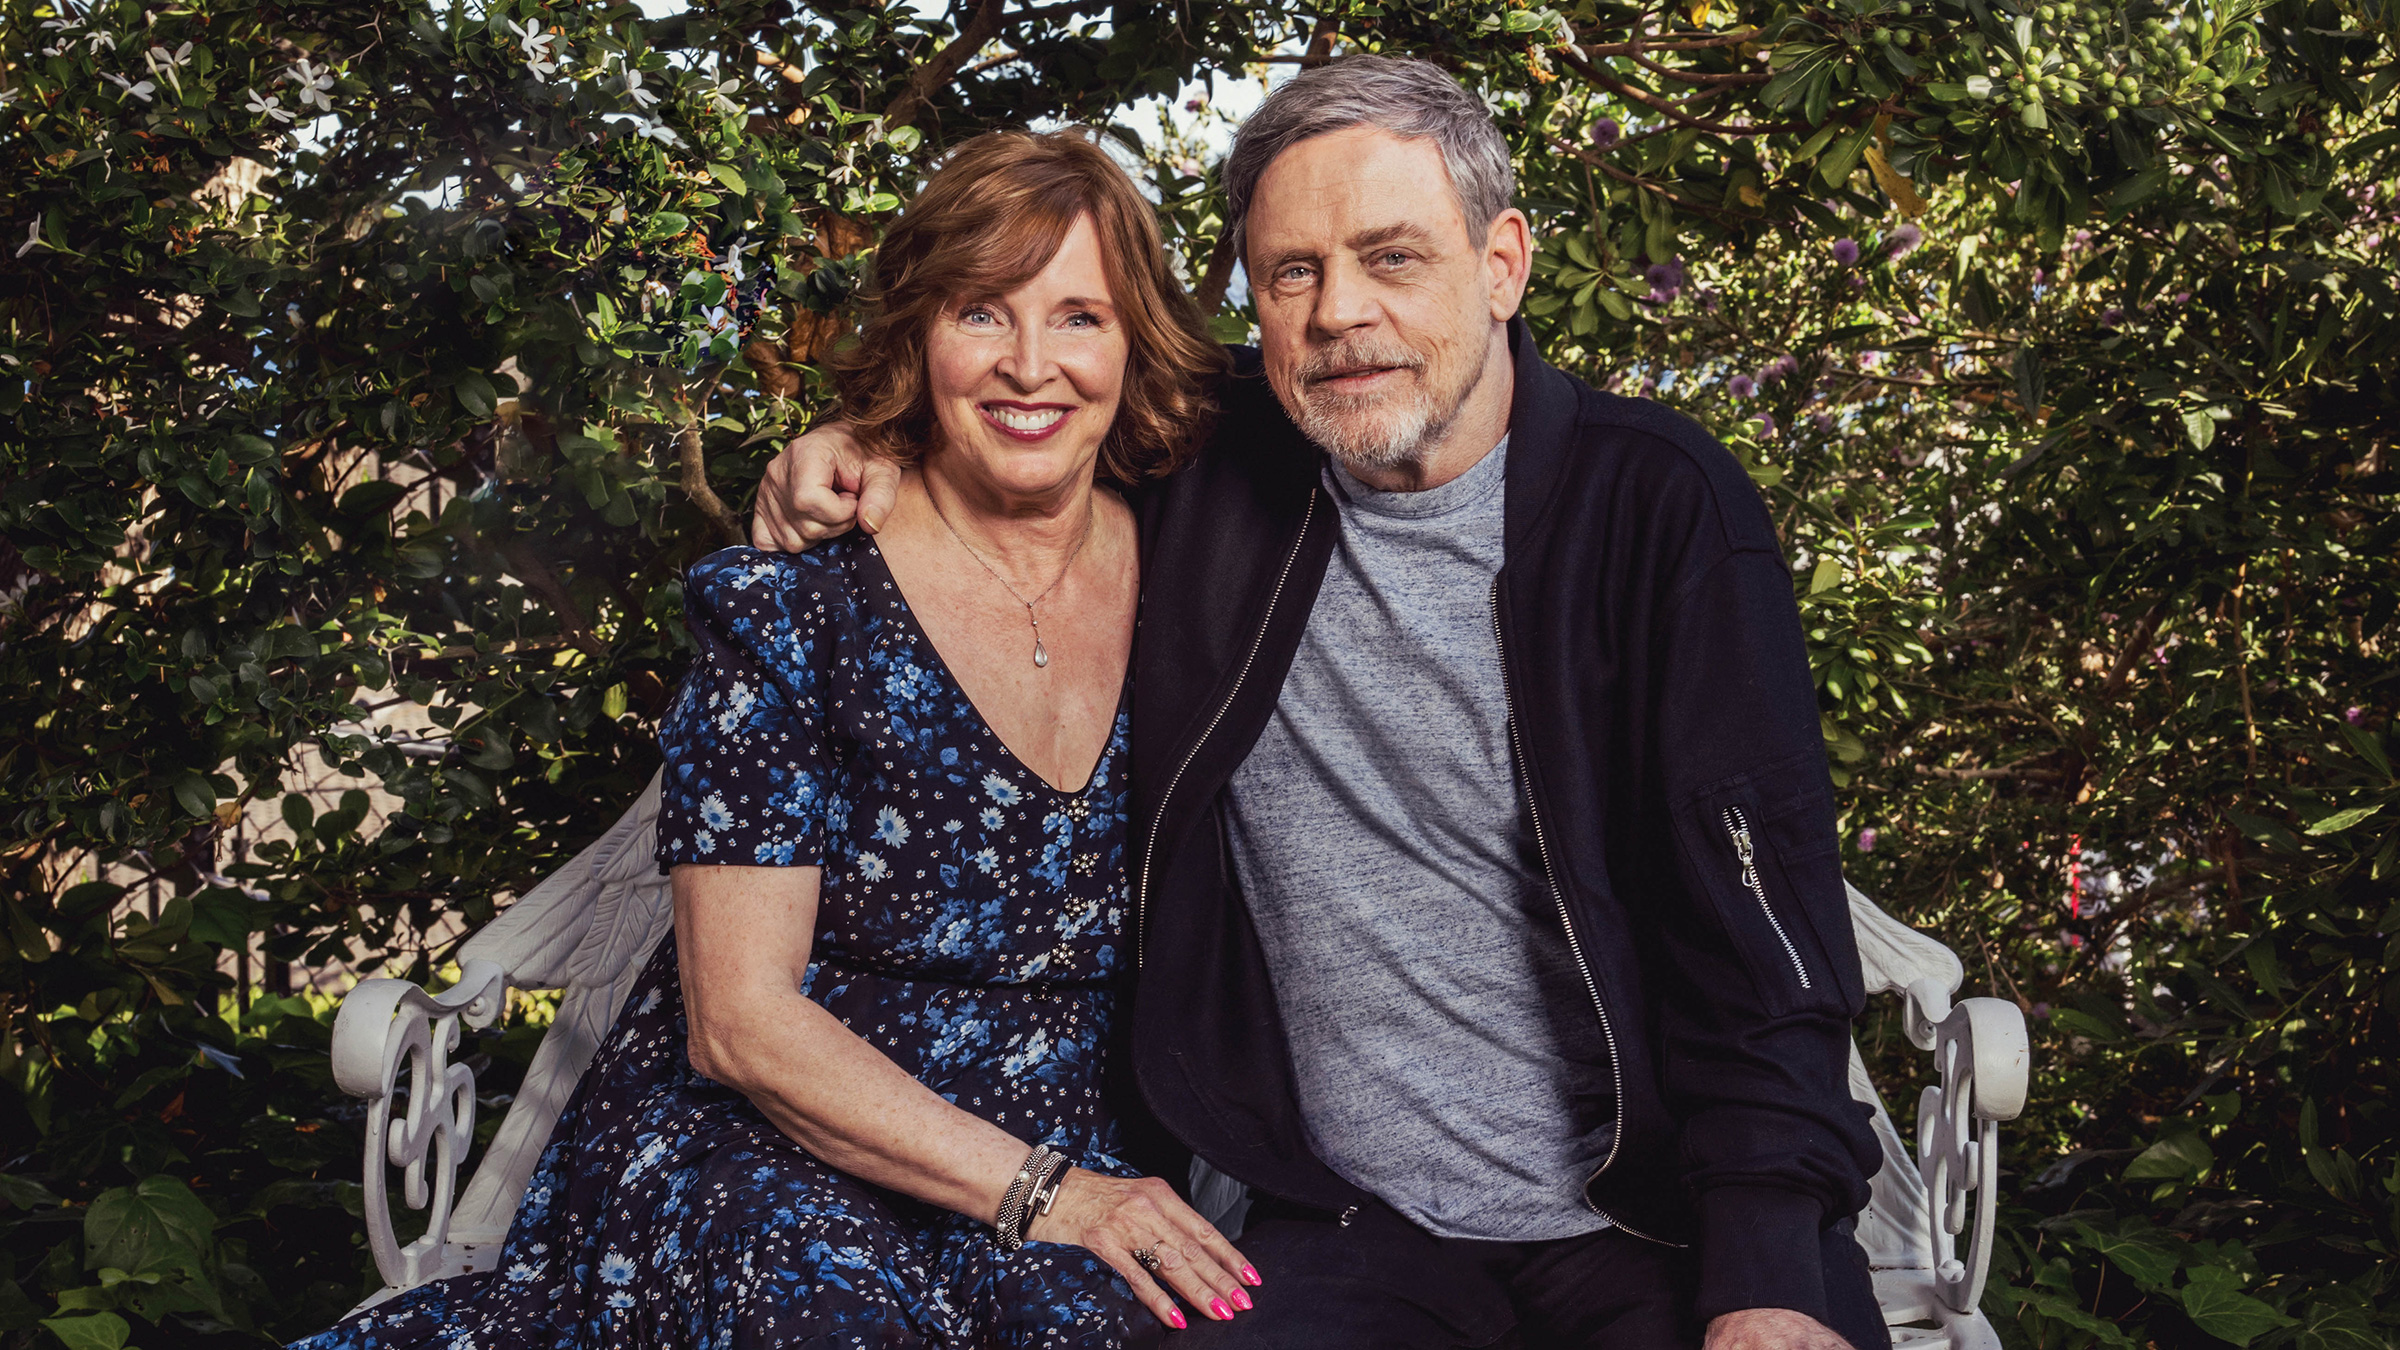 featured image for Aging well: Marilou and Mark Hamill share their thoughts